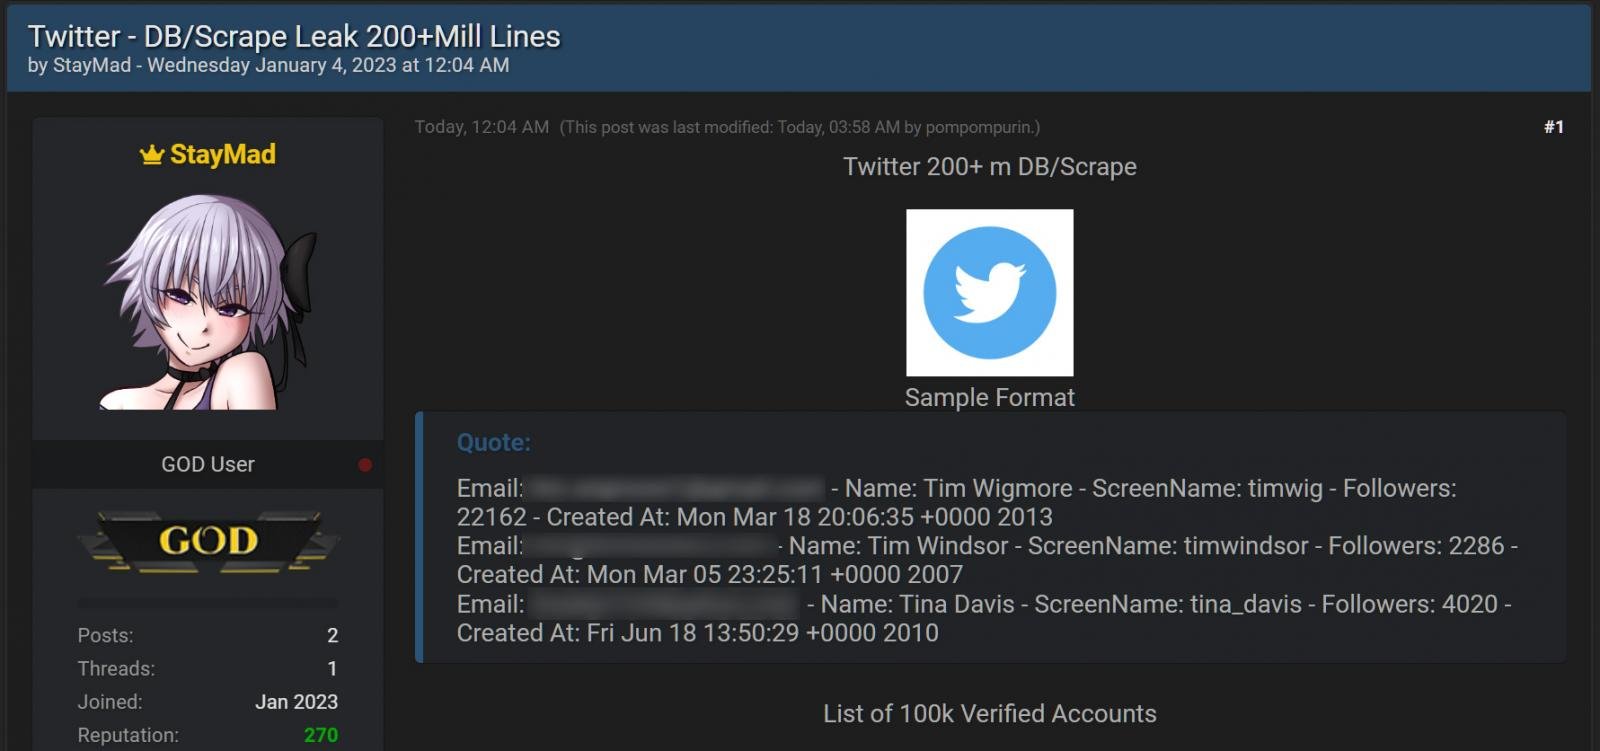 A dataset containing the email addresses of 200 million Twitter profiles was put up for sale.